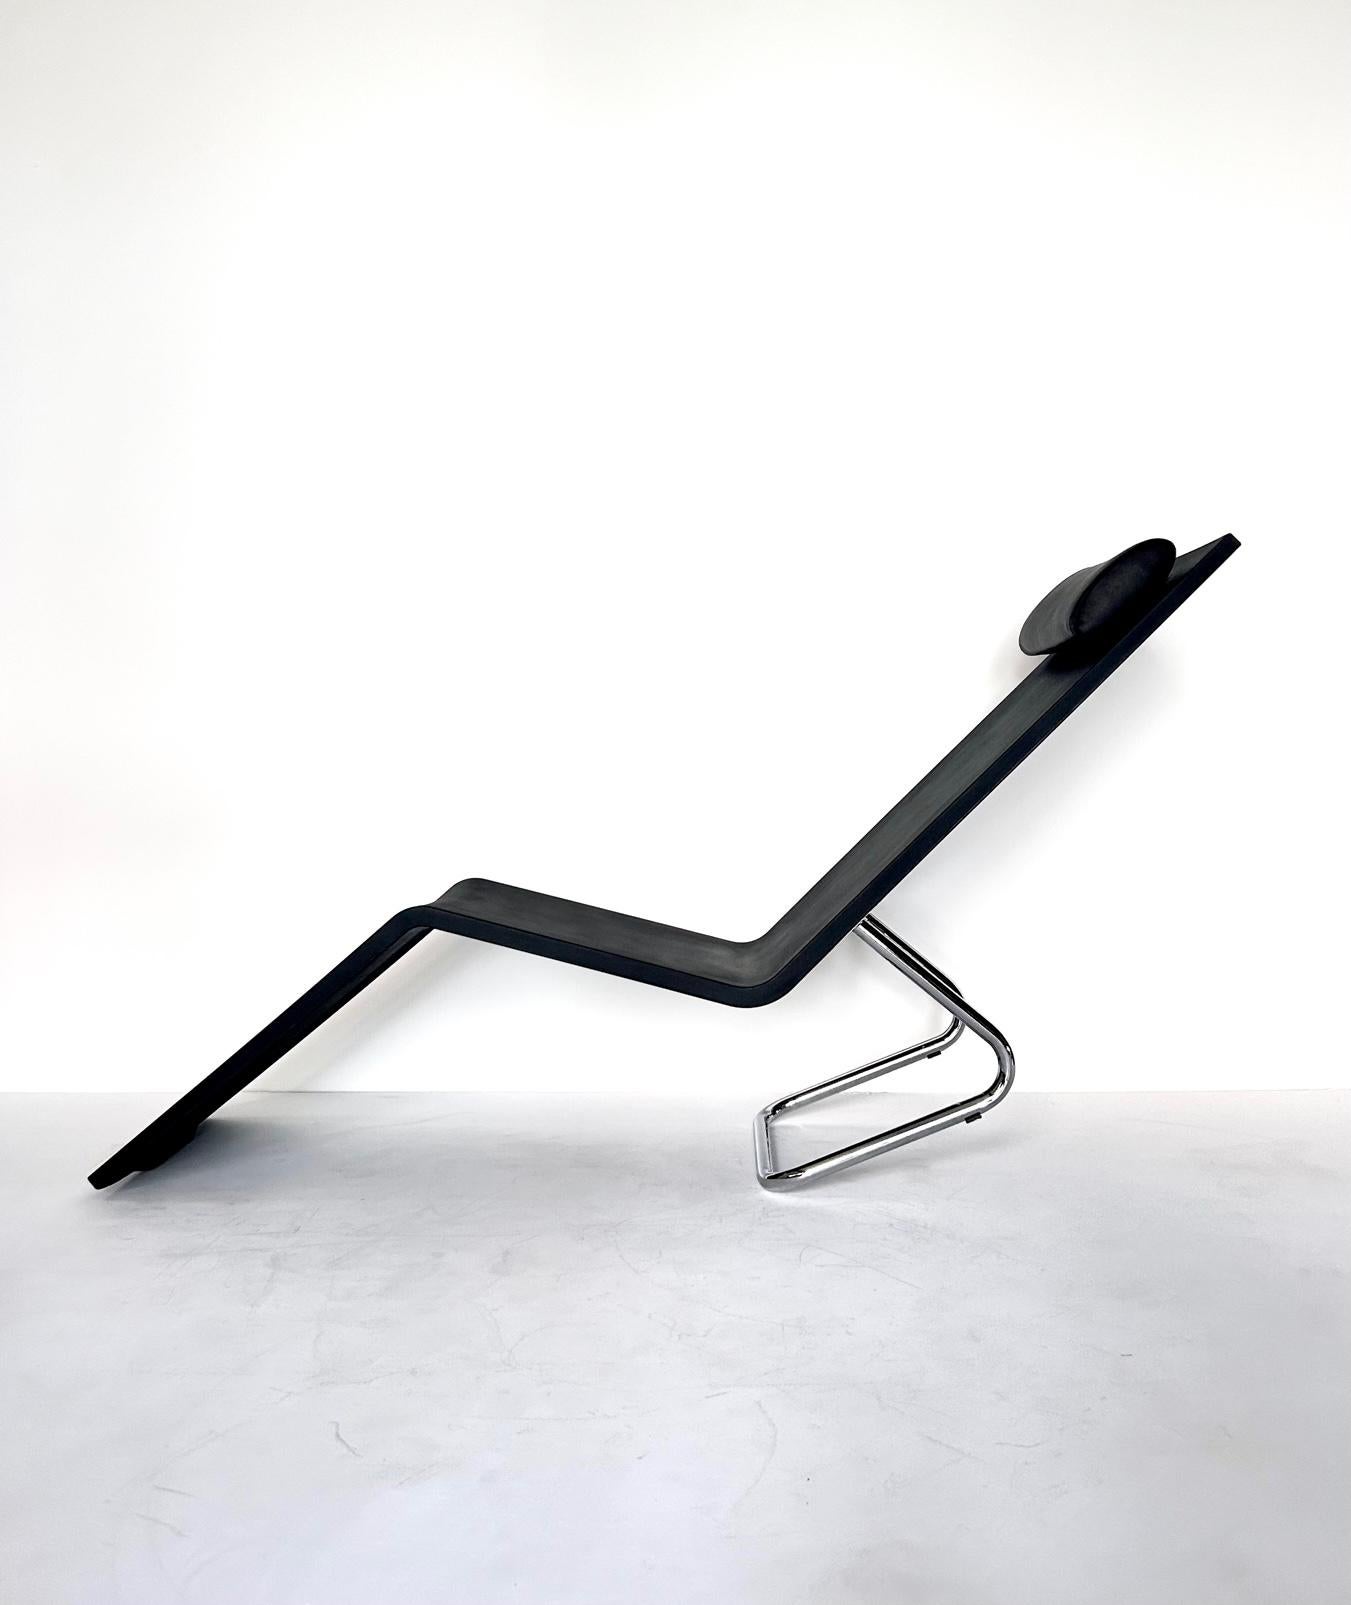 Minimalist MVS lounge chair by Maarten Van Severen for Vitra, 1990s

The MVS lounge chair was designed by Maarten Van Severen in polyurethane.

An ingenious frame allowing a switch between sitting and lying position.

Brown leather pillow. This